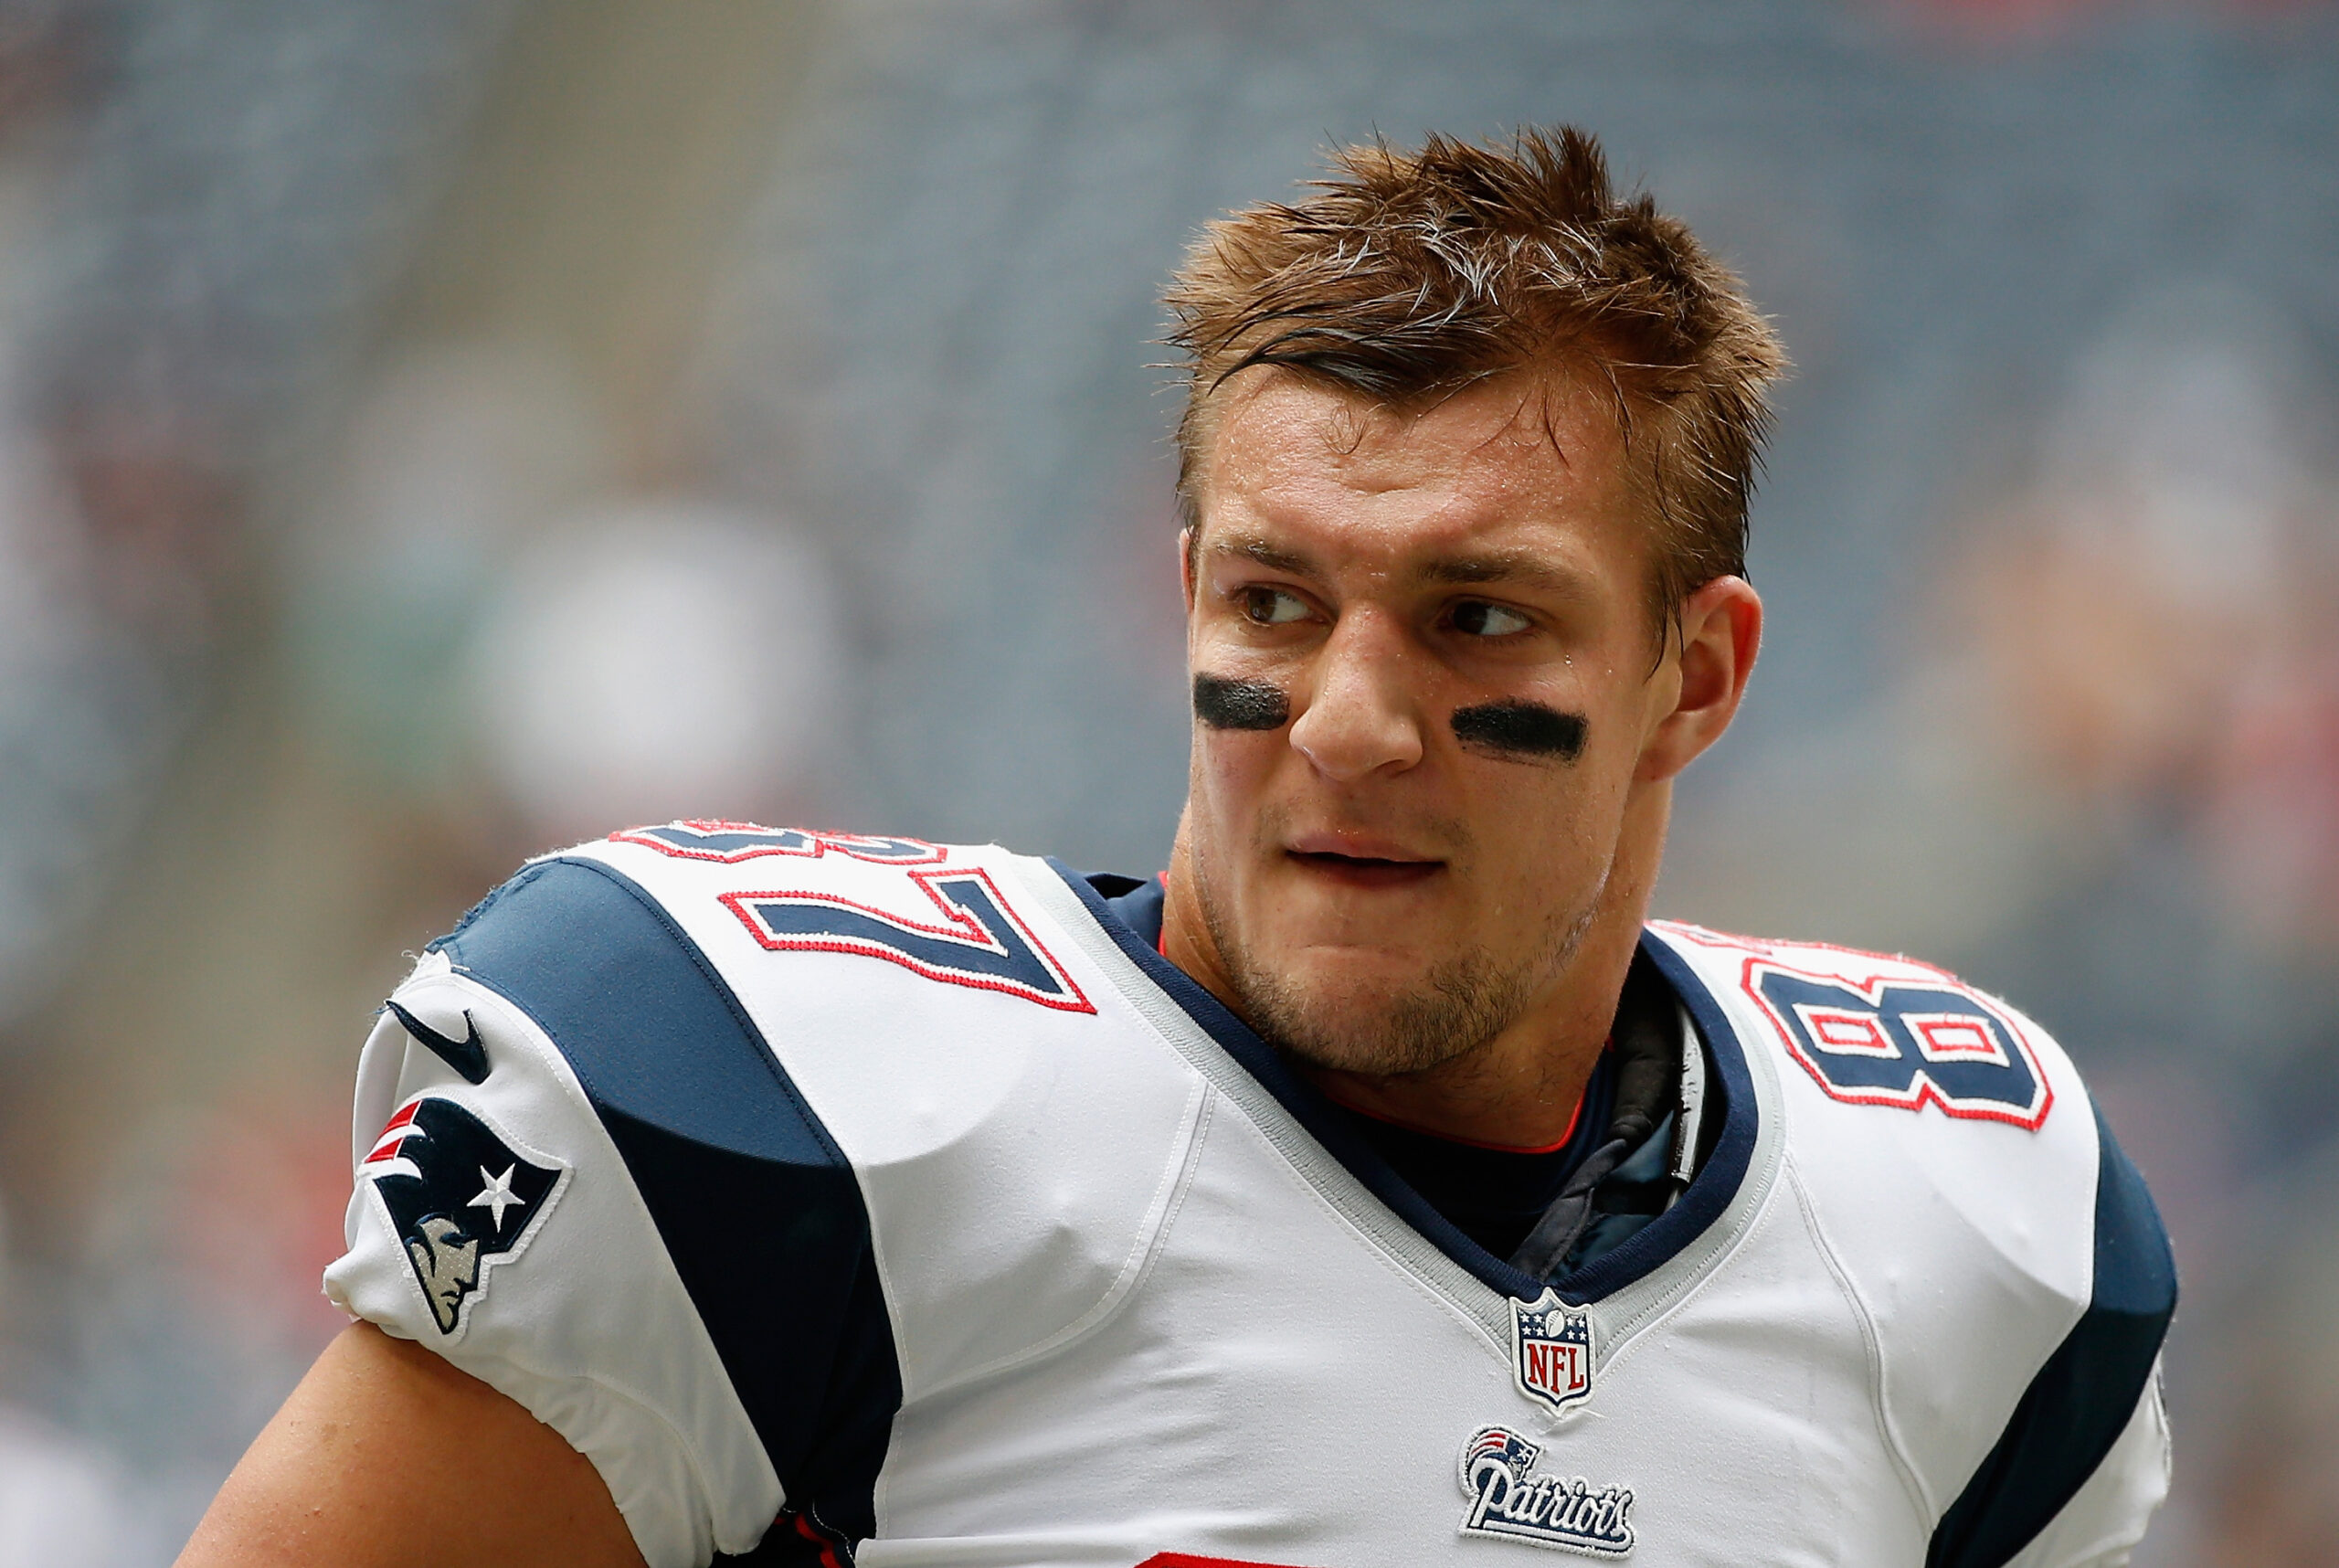 What is Rob Gronkowski's net worth?